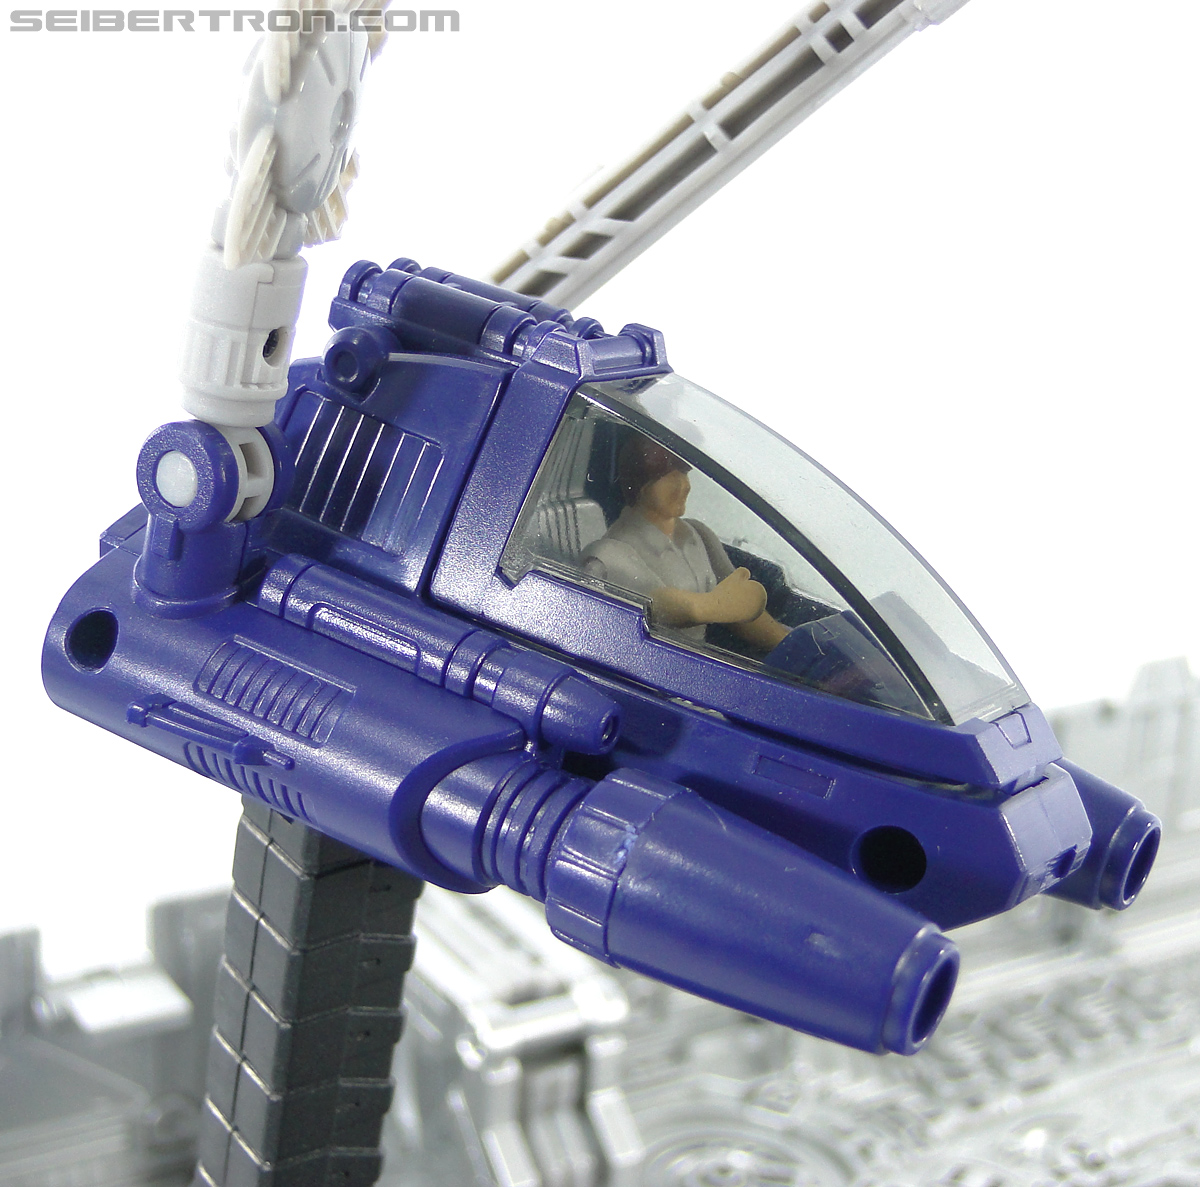 Transformers Masterpiece Spike Witwicky (Image #58 of 60)